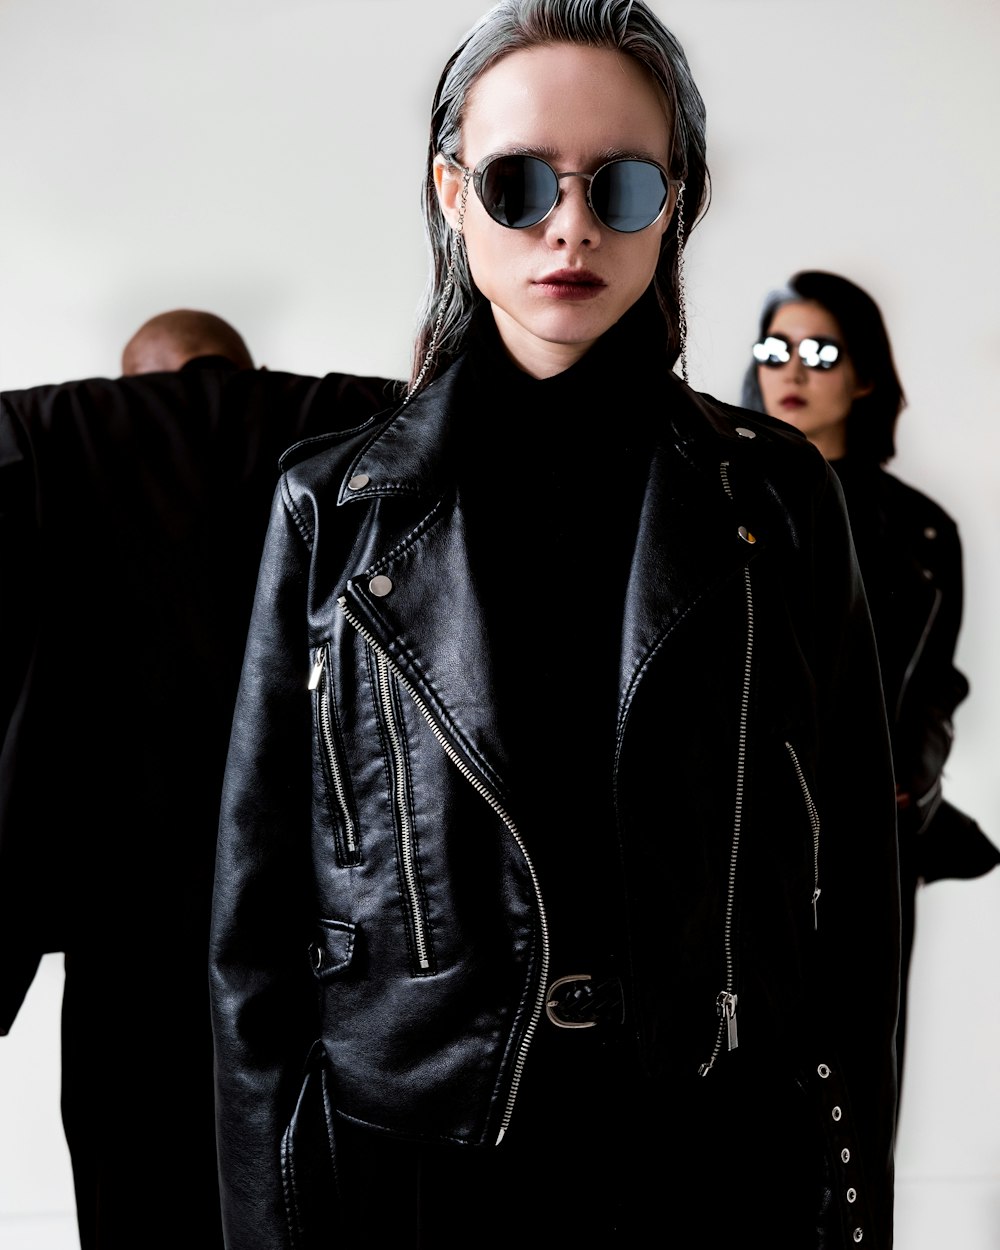 a woman wearing a black leather jacket and sunglasses